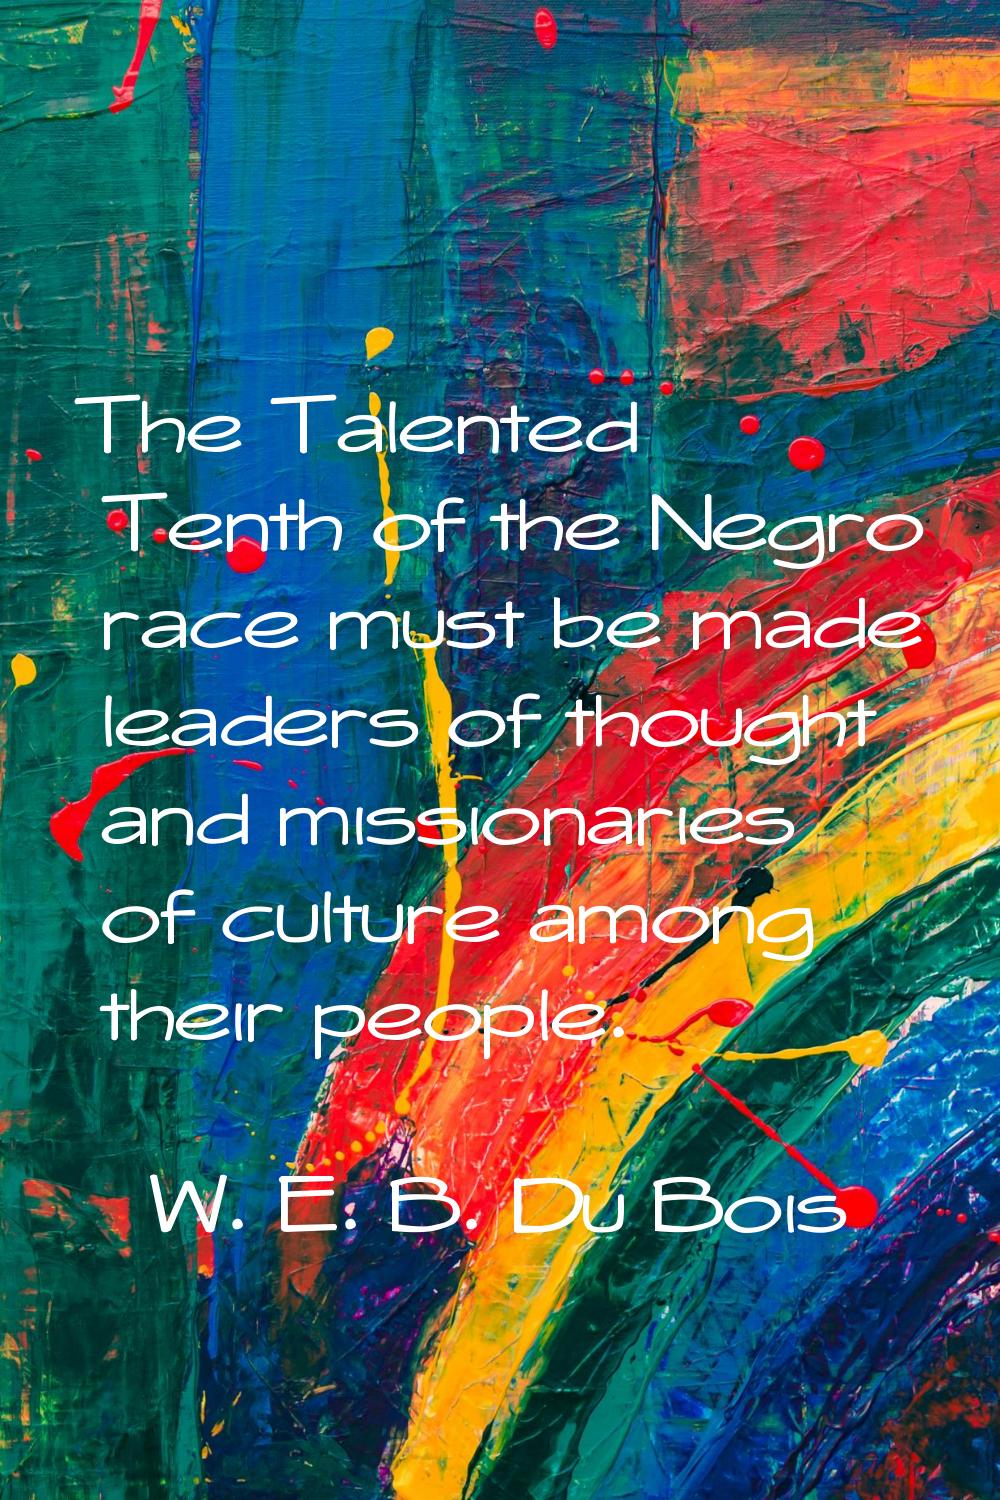 The Talented Tenth of the Negro race must be made leaders of thought and missionaries of culture am